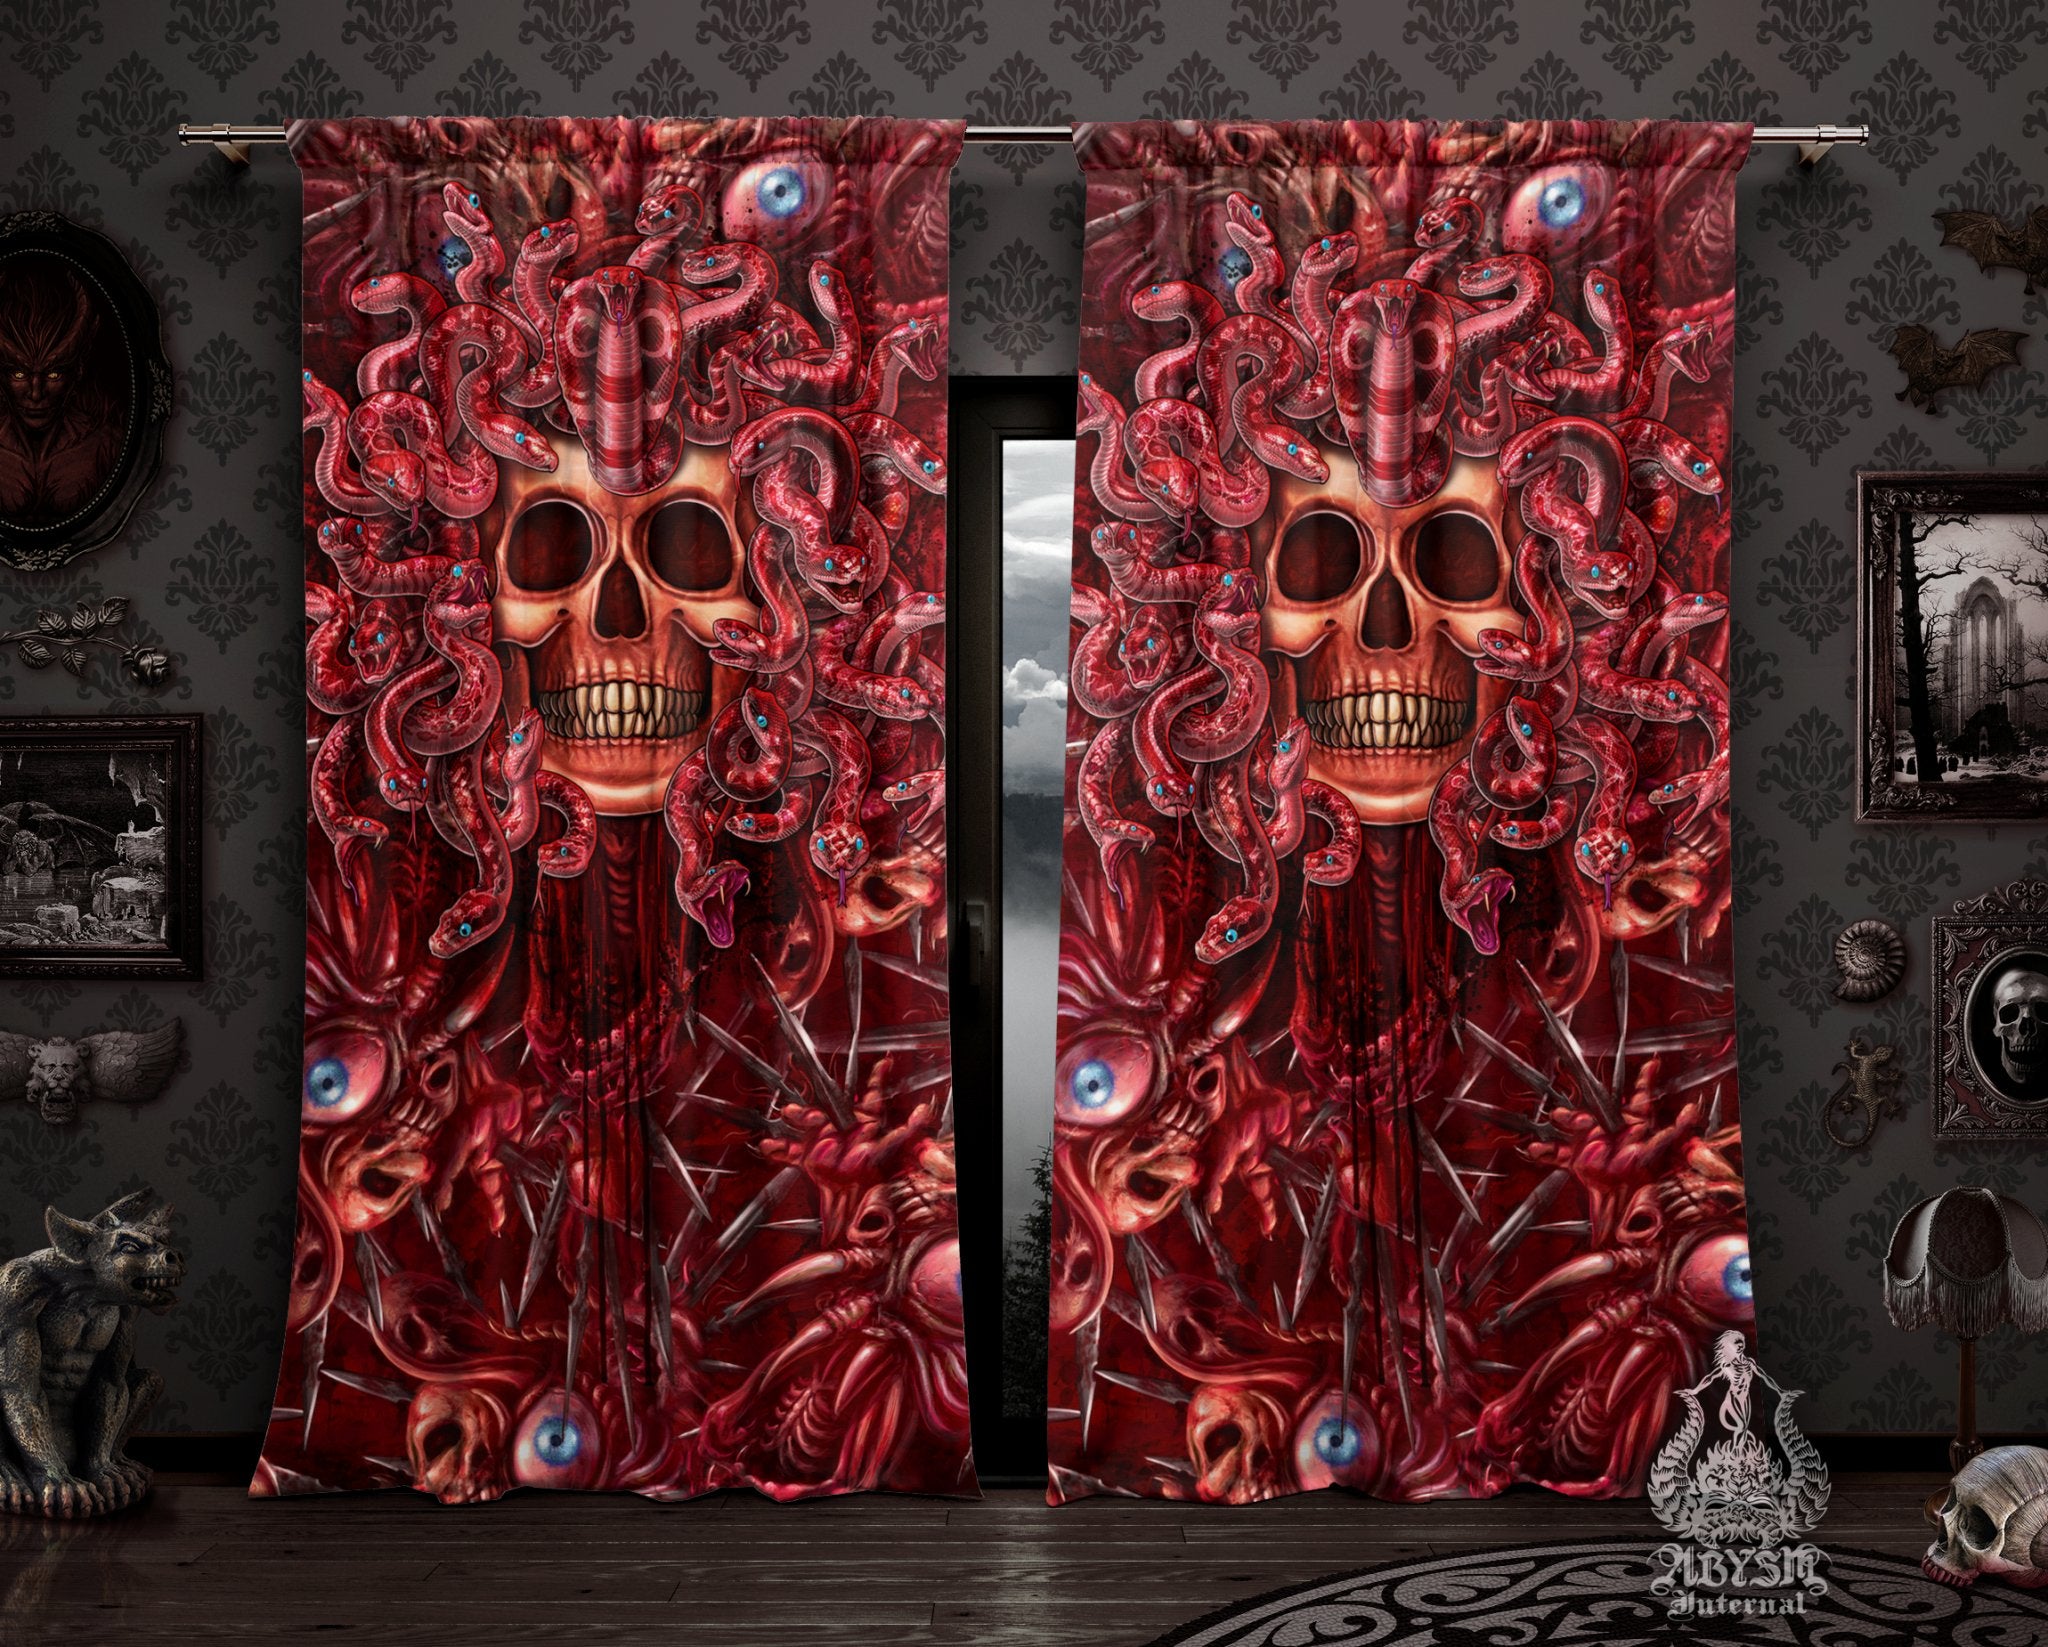 Halloween Curtains, 50x84' Printed Window Panels, Horror Skull Art Print, Spooky Decor - Gore and Blood, Medusa & Snakes, 3 Faces - Abysm Internal